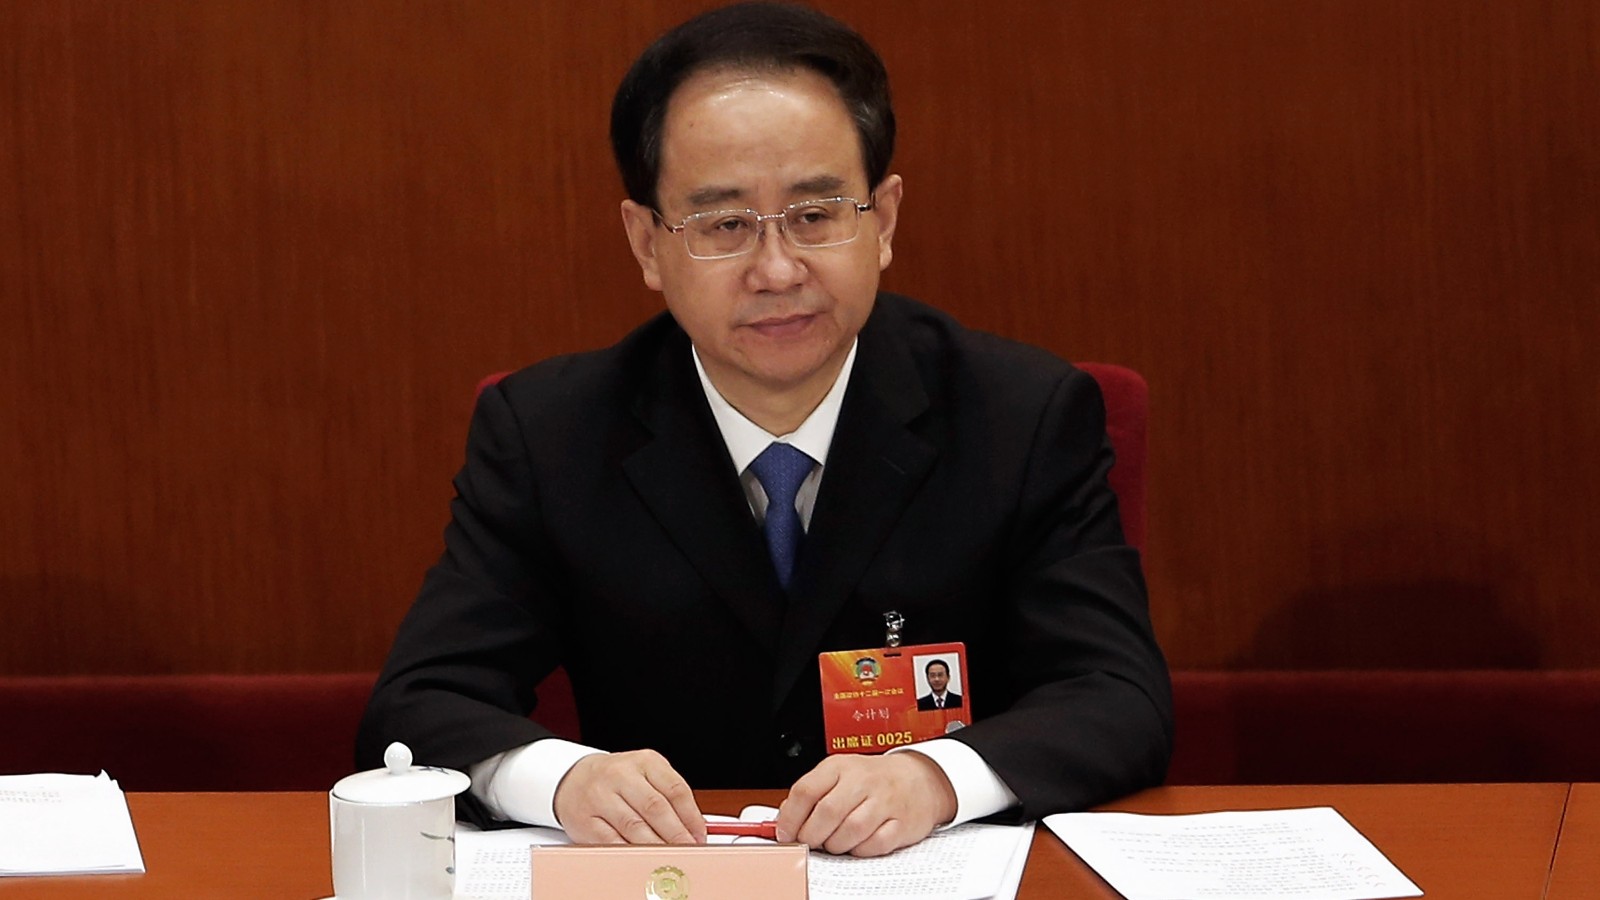 Power For Sex China Arrests Former Top Aide Ling Jihua Cnn 